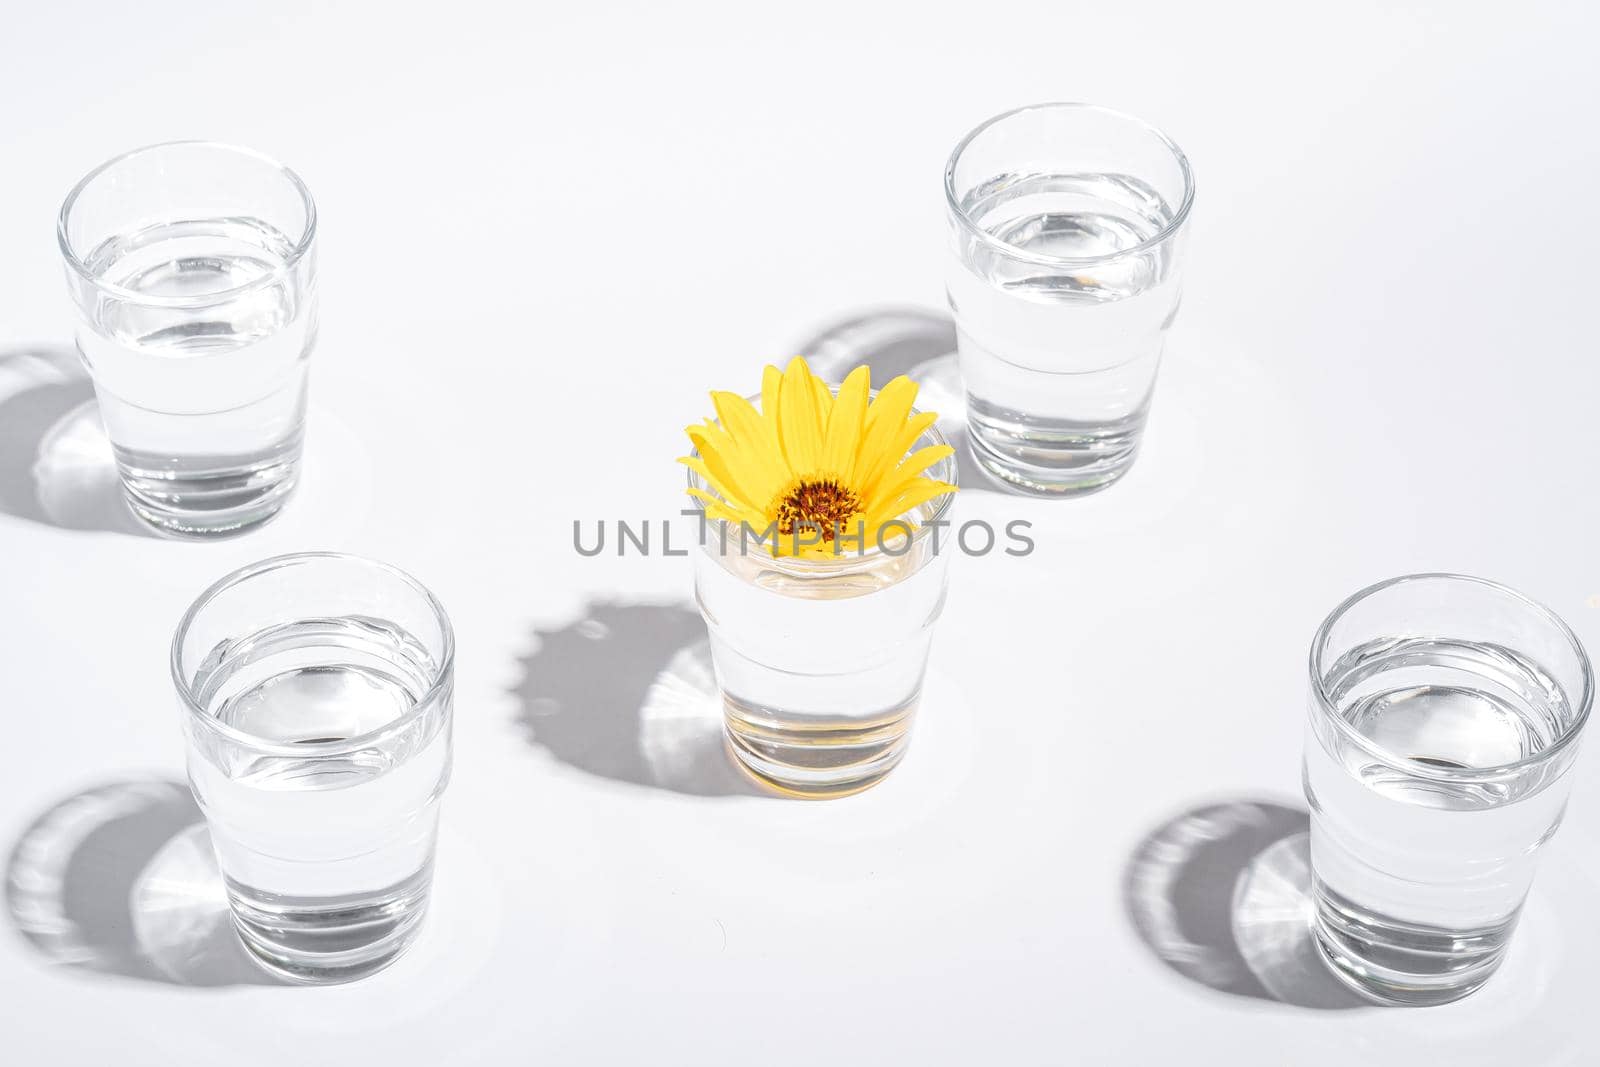 Fresh clear water drink with yellow flower in glass on white background, hard light creative composition, angle view